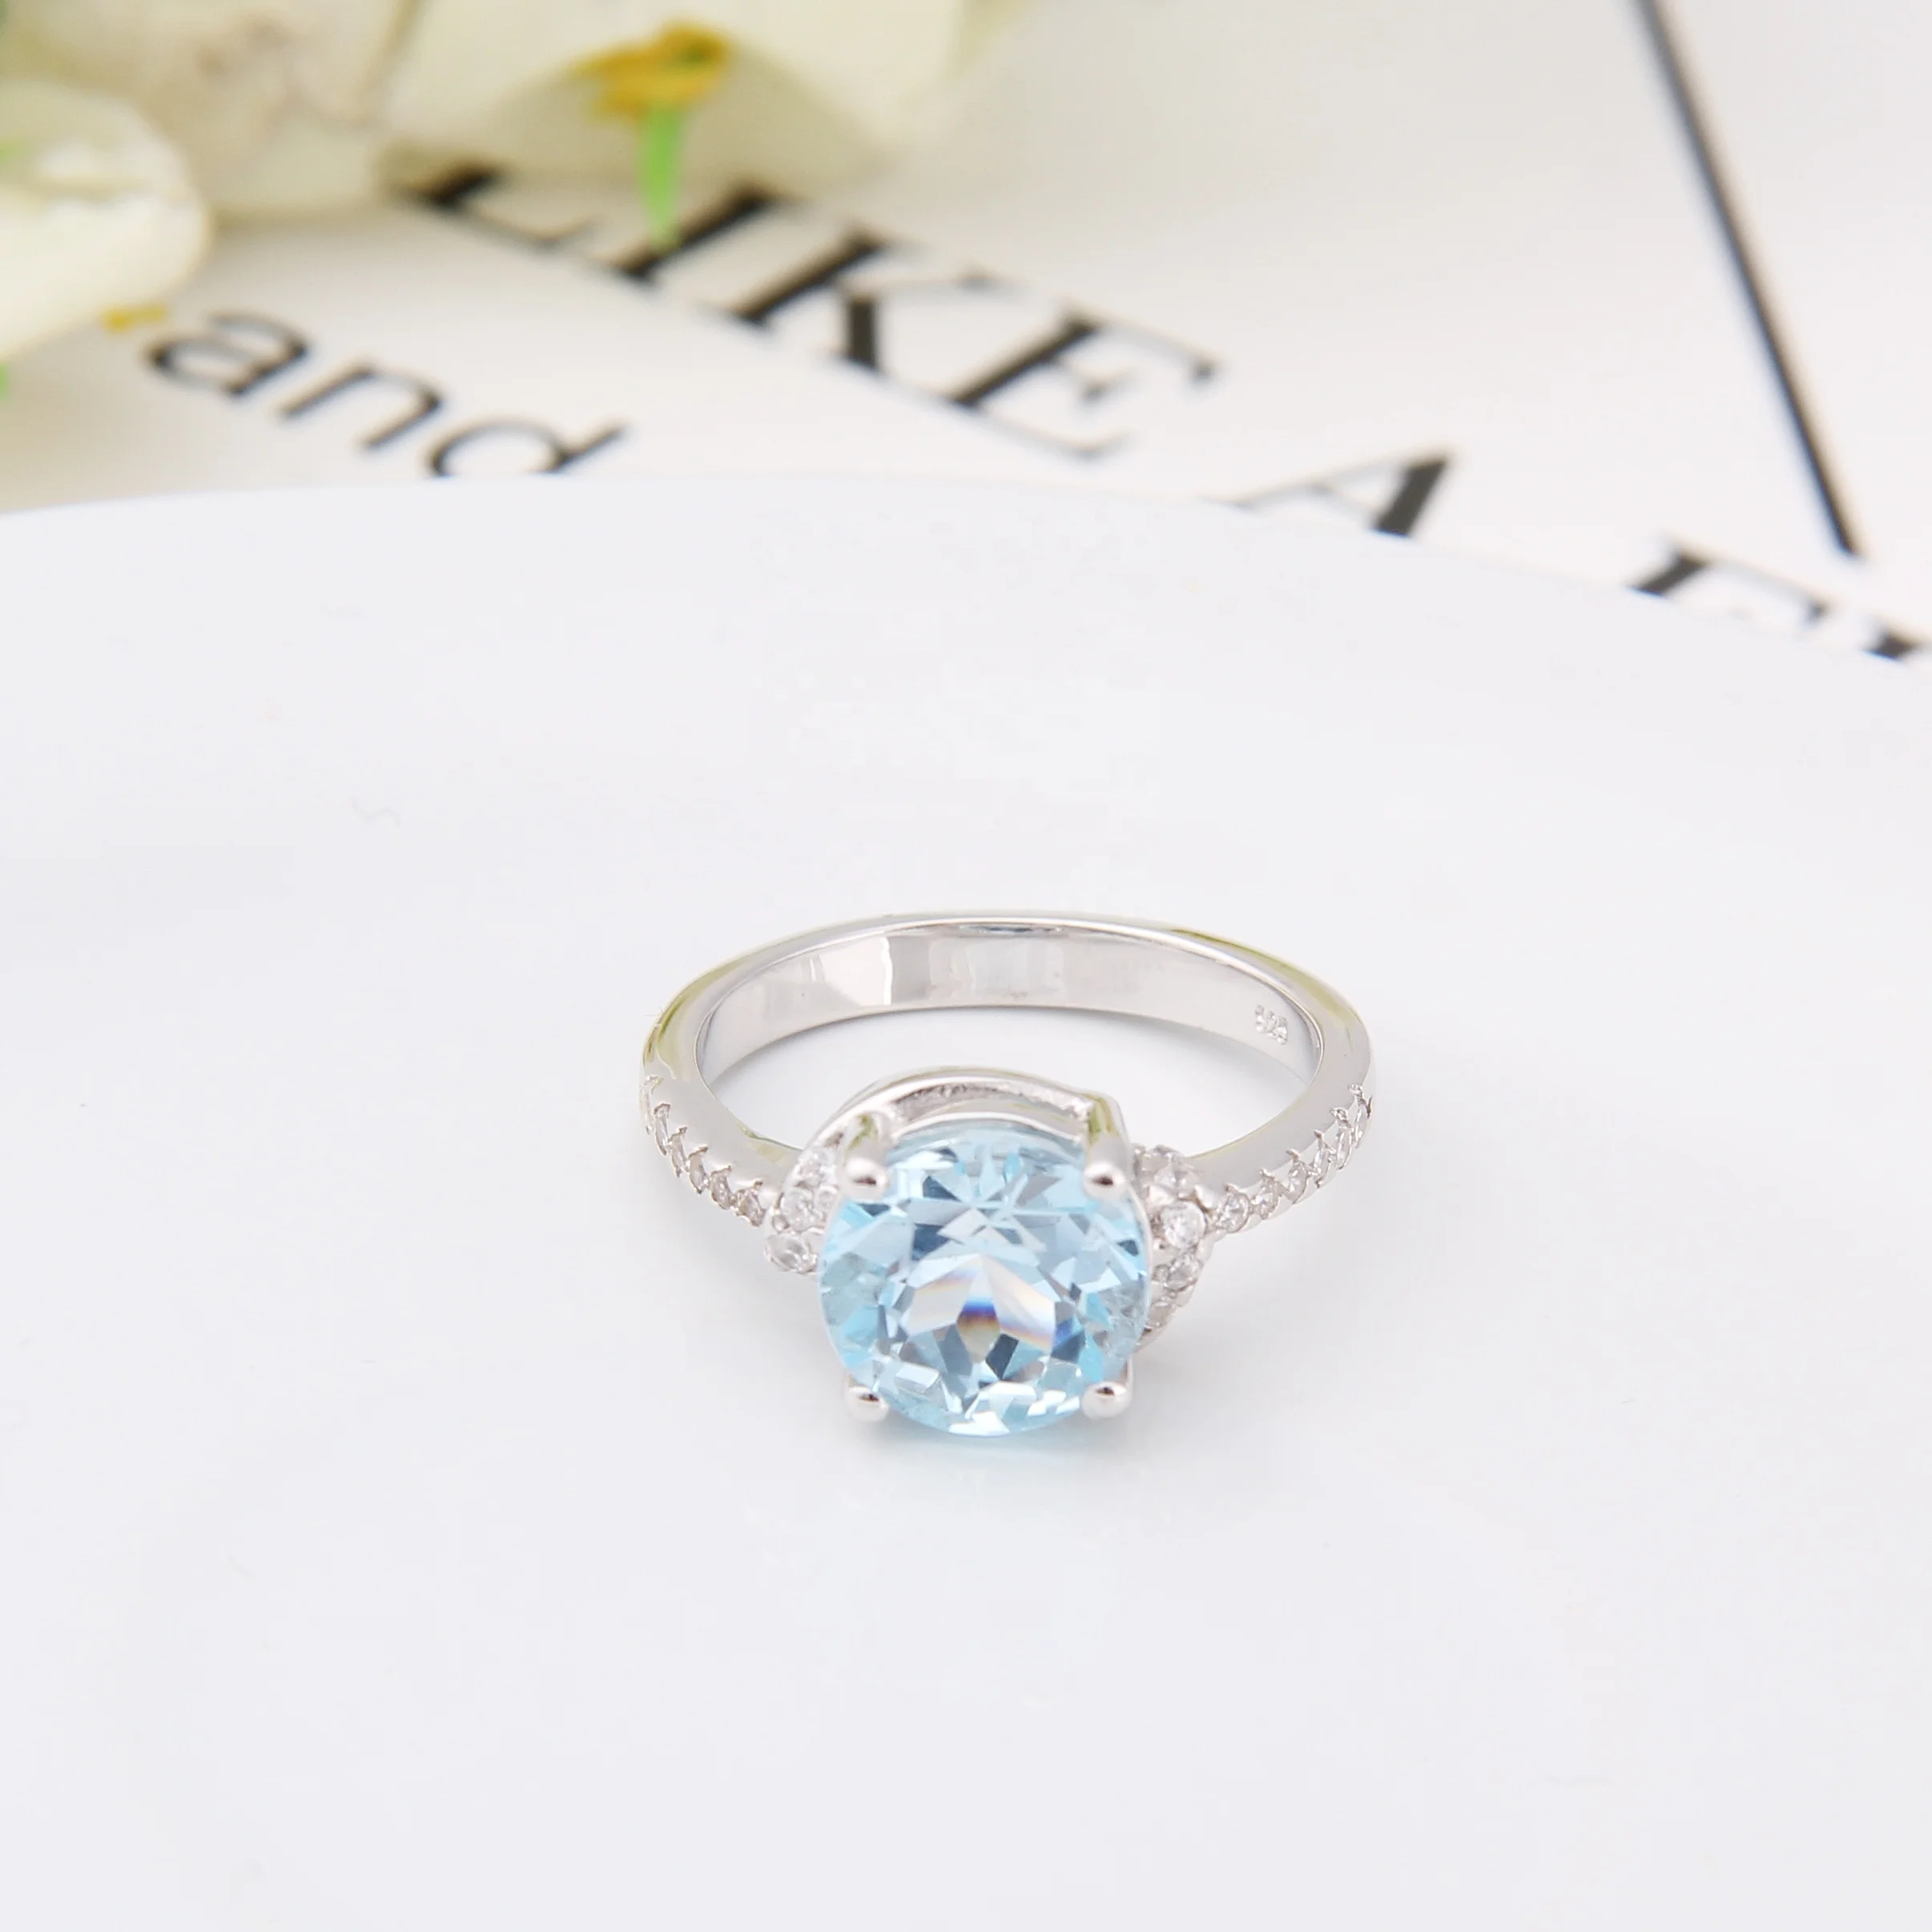 

Abiding Sky Blue Topaz Luxury Jewelry Unique Gift Round Prong Setting Cubic Zircon Sterling Silver Ring For Women